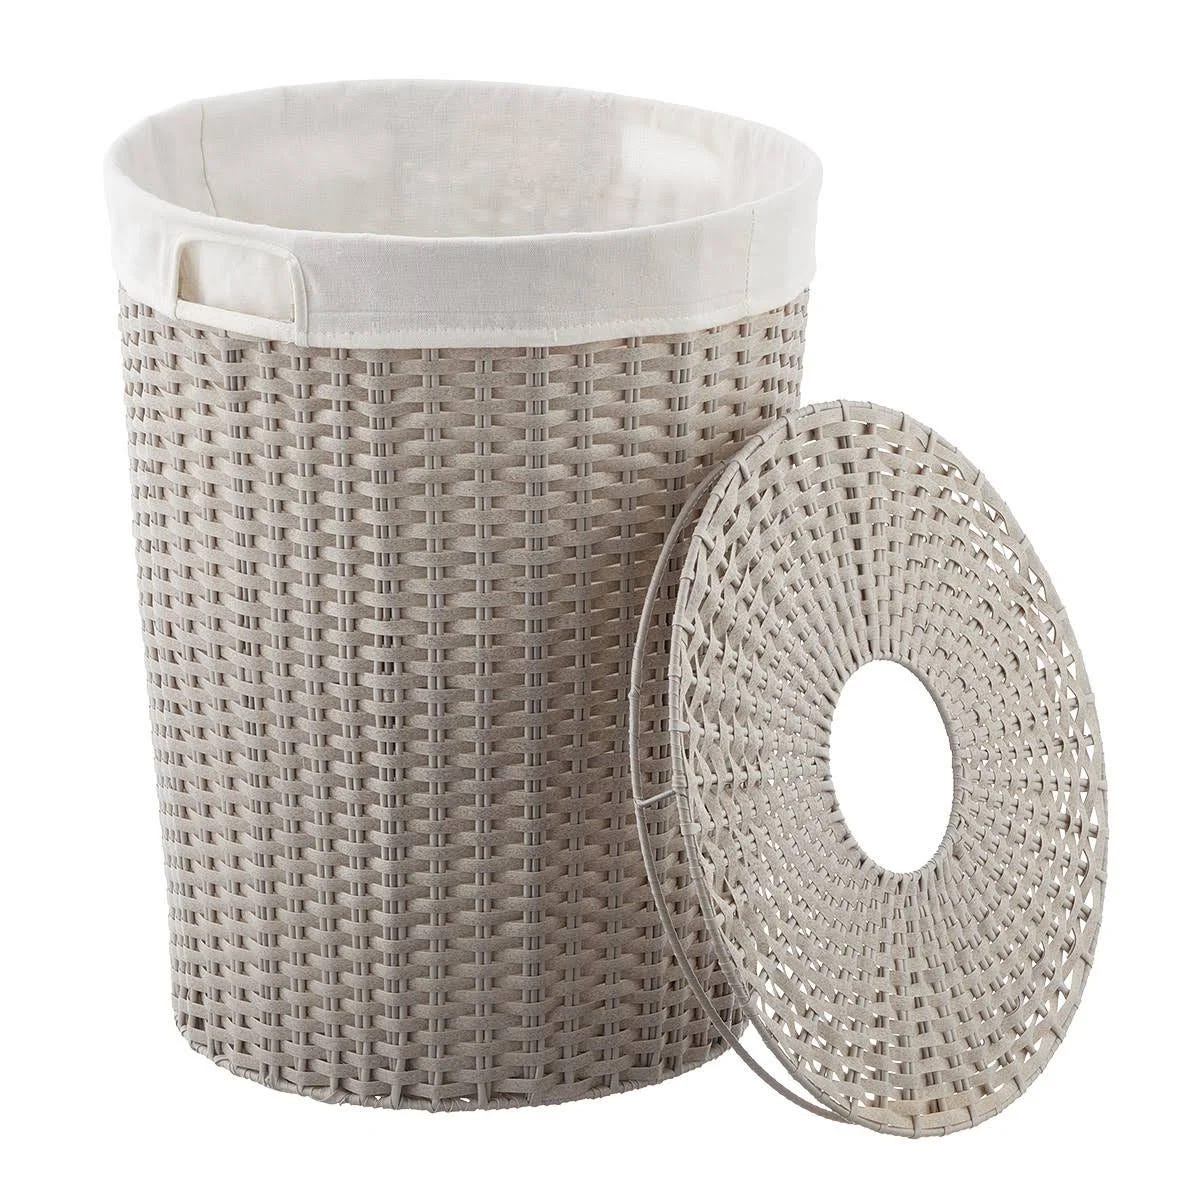 Montauk Round Laundry Hamper by The Container Store | Image